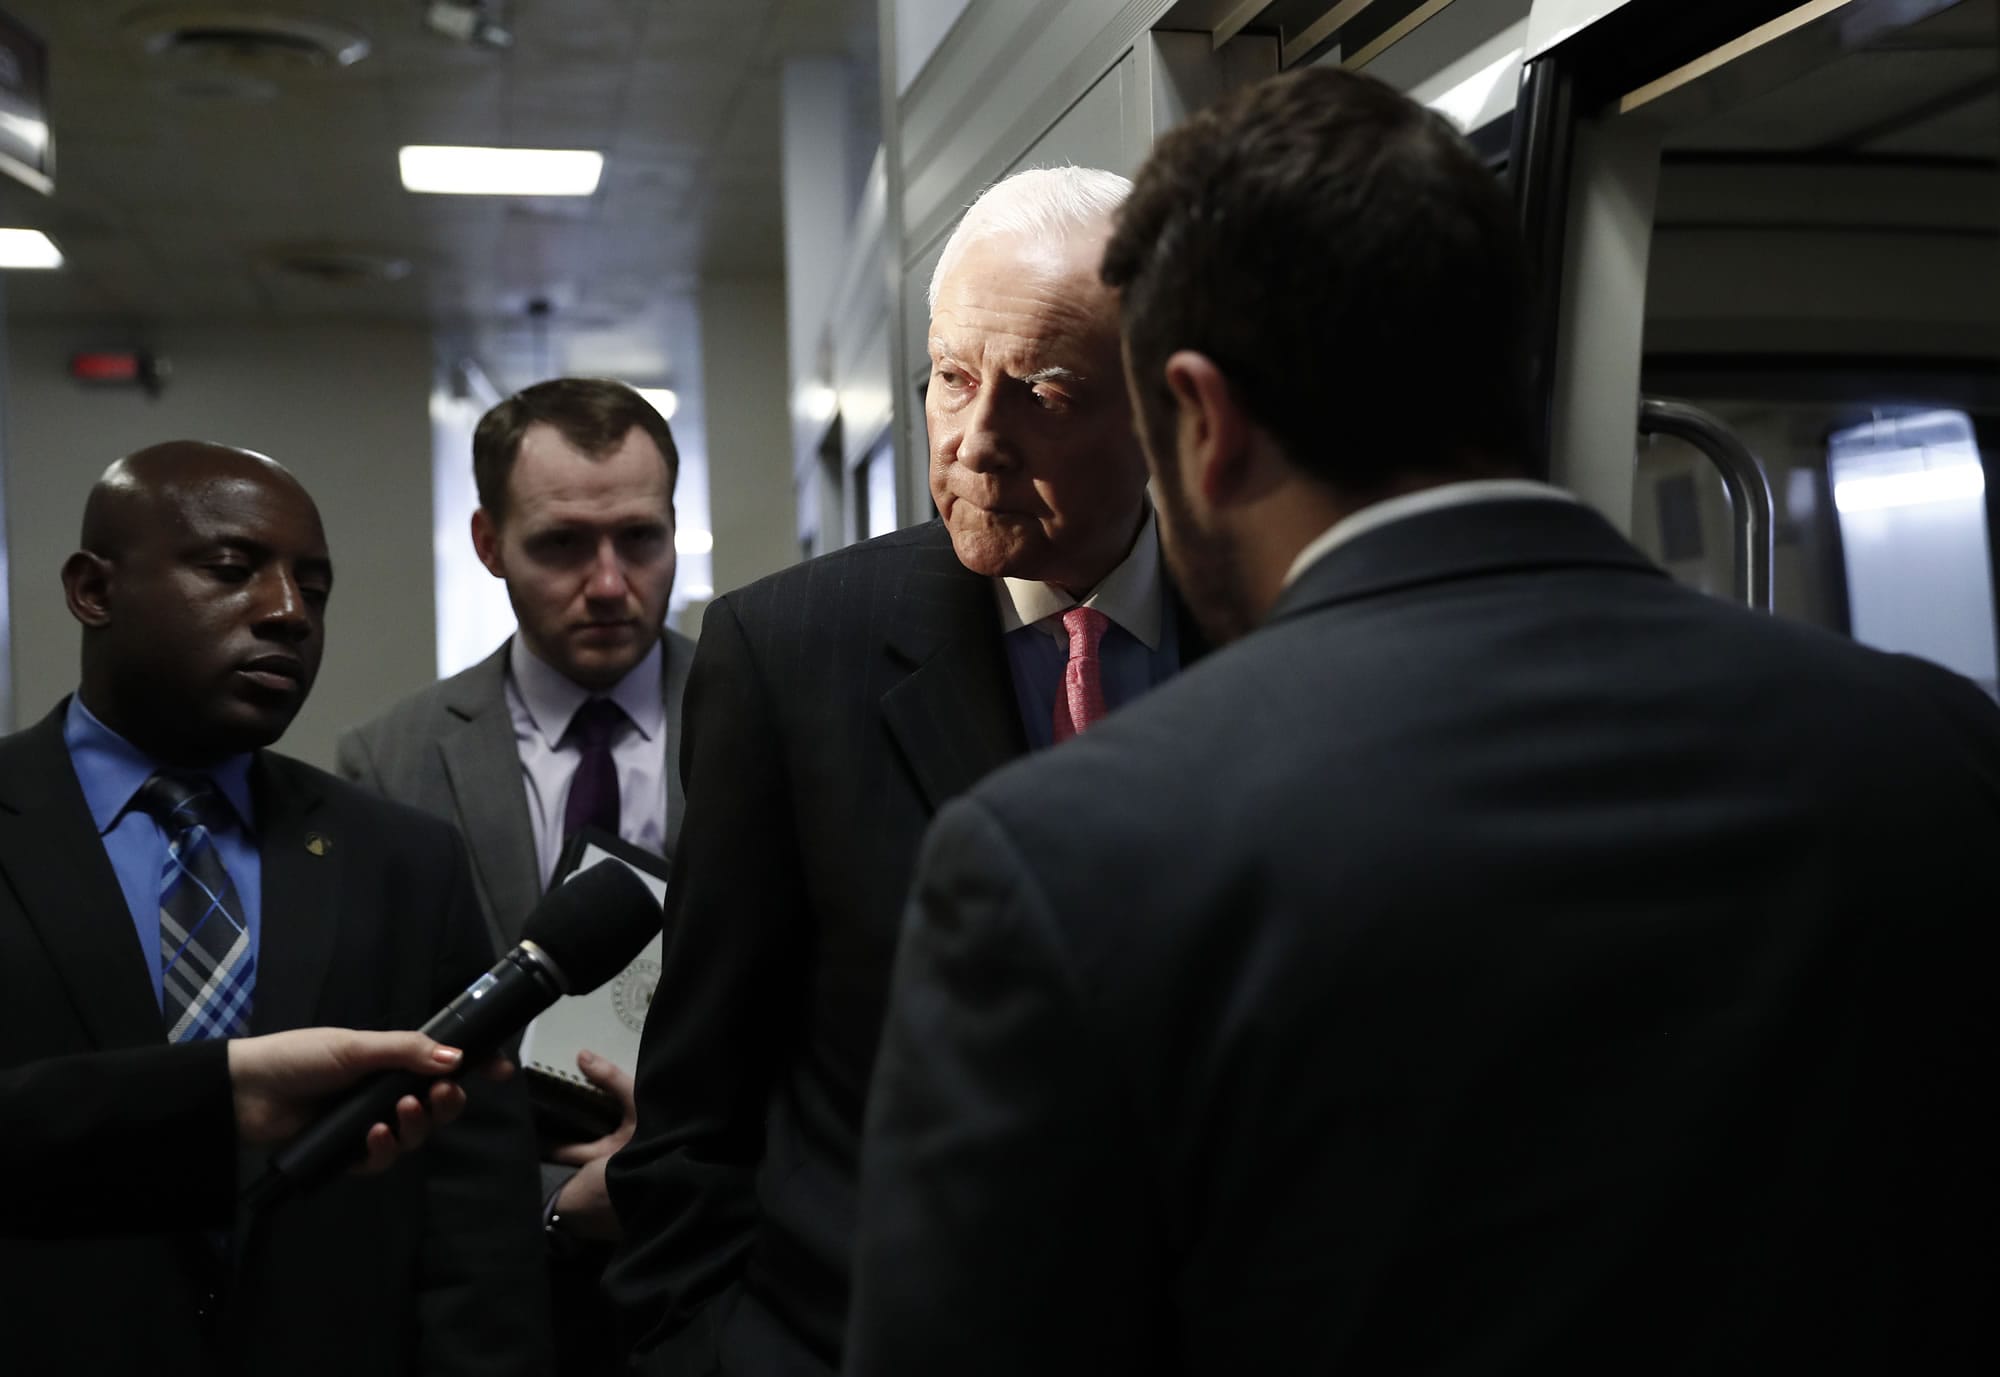 Sen. Orrin Hatch, R-Utah talk to a reporter as he steps onto the Capitol Subway on Capitol Hill in Washington, Wednesday, May 24, 2017.